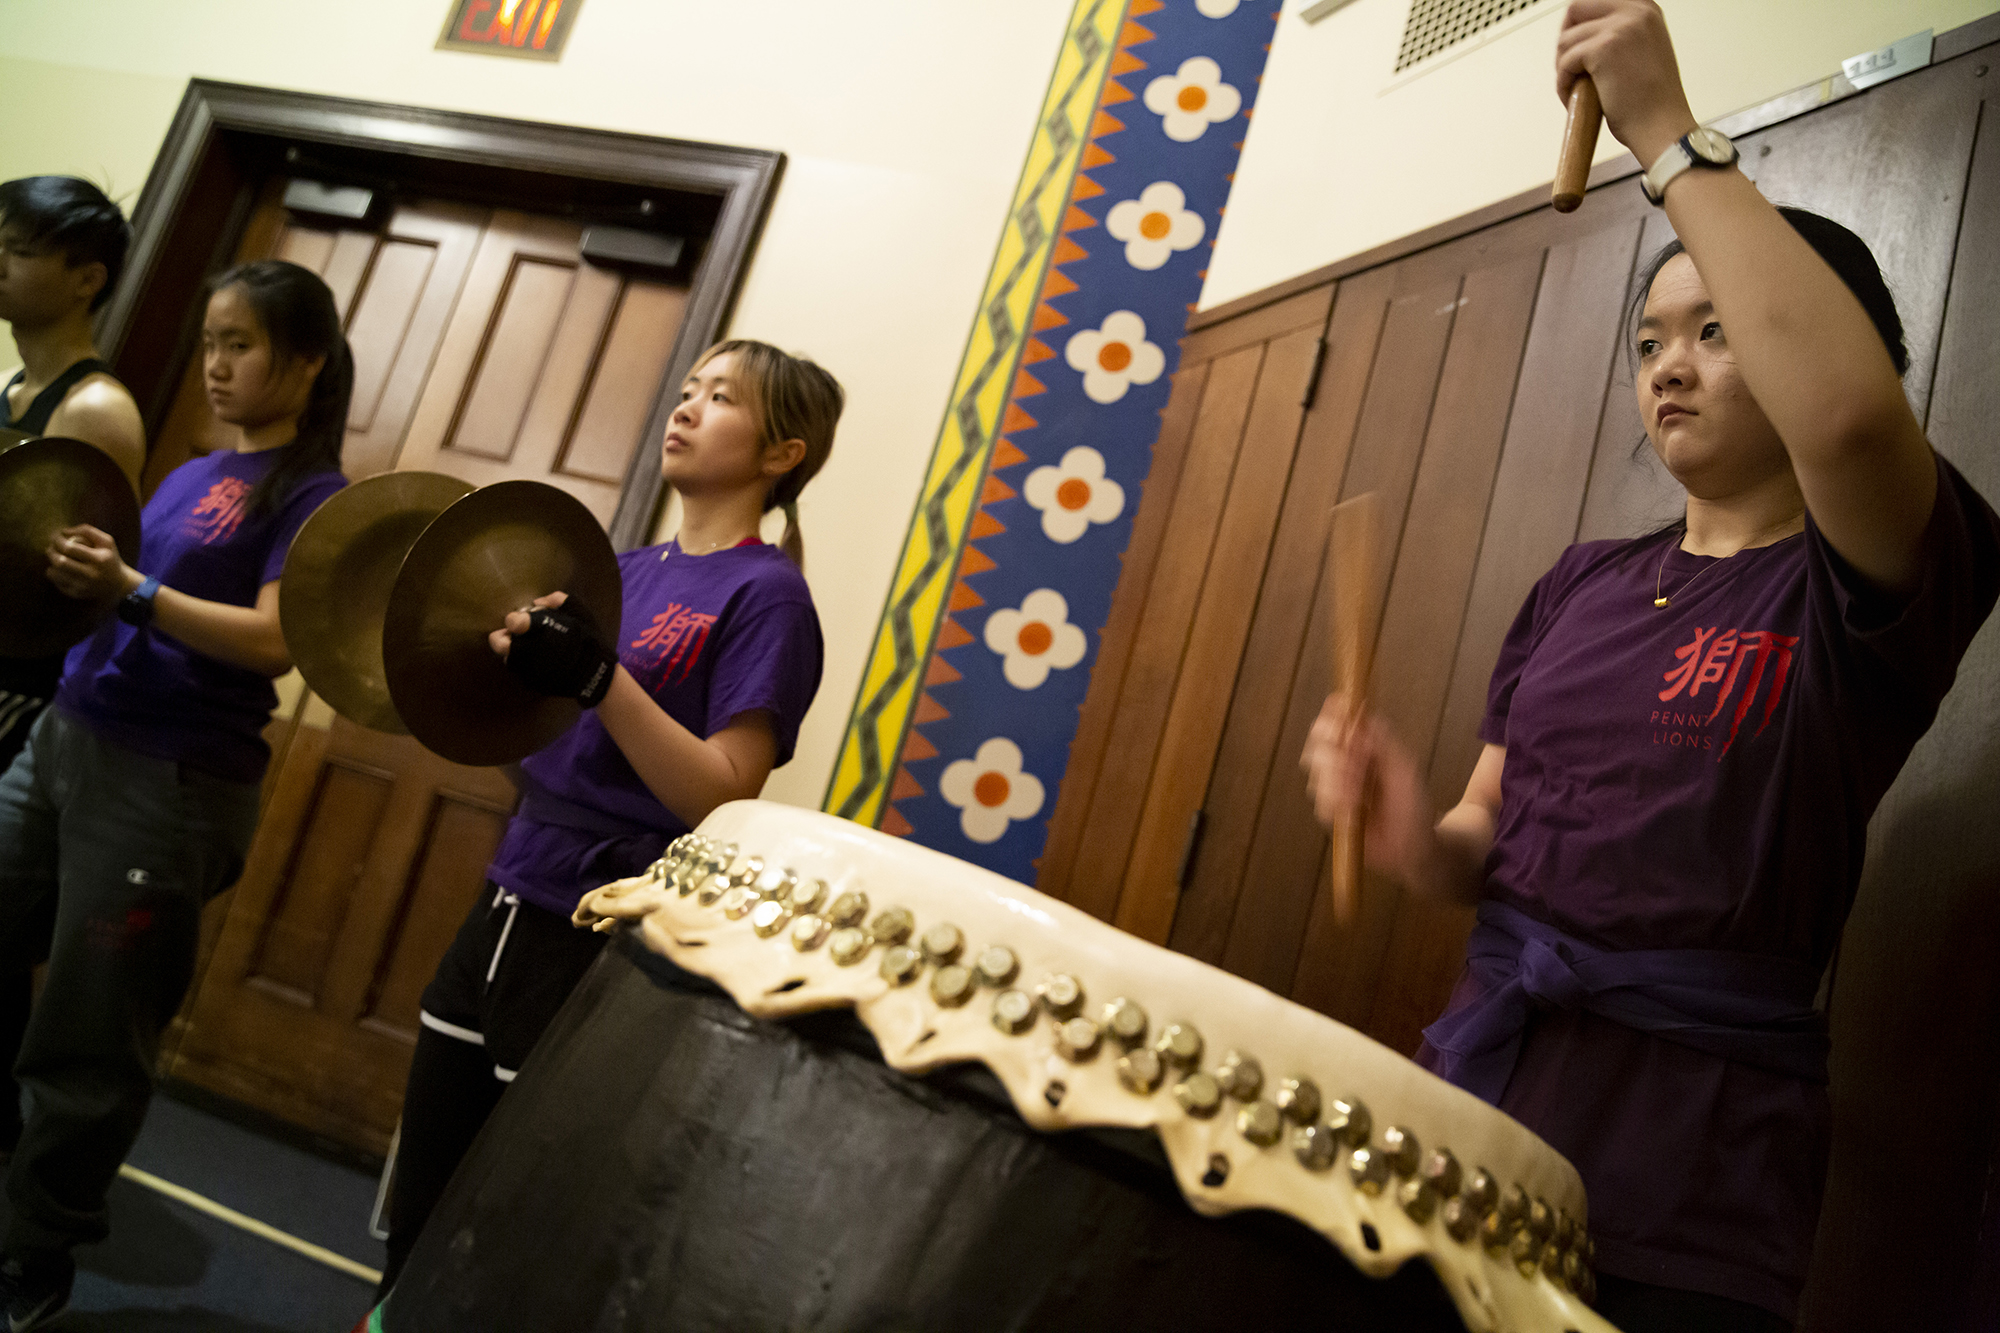 One student with arms raised while playing a drum and three other students on her left playing the symbols.